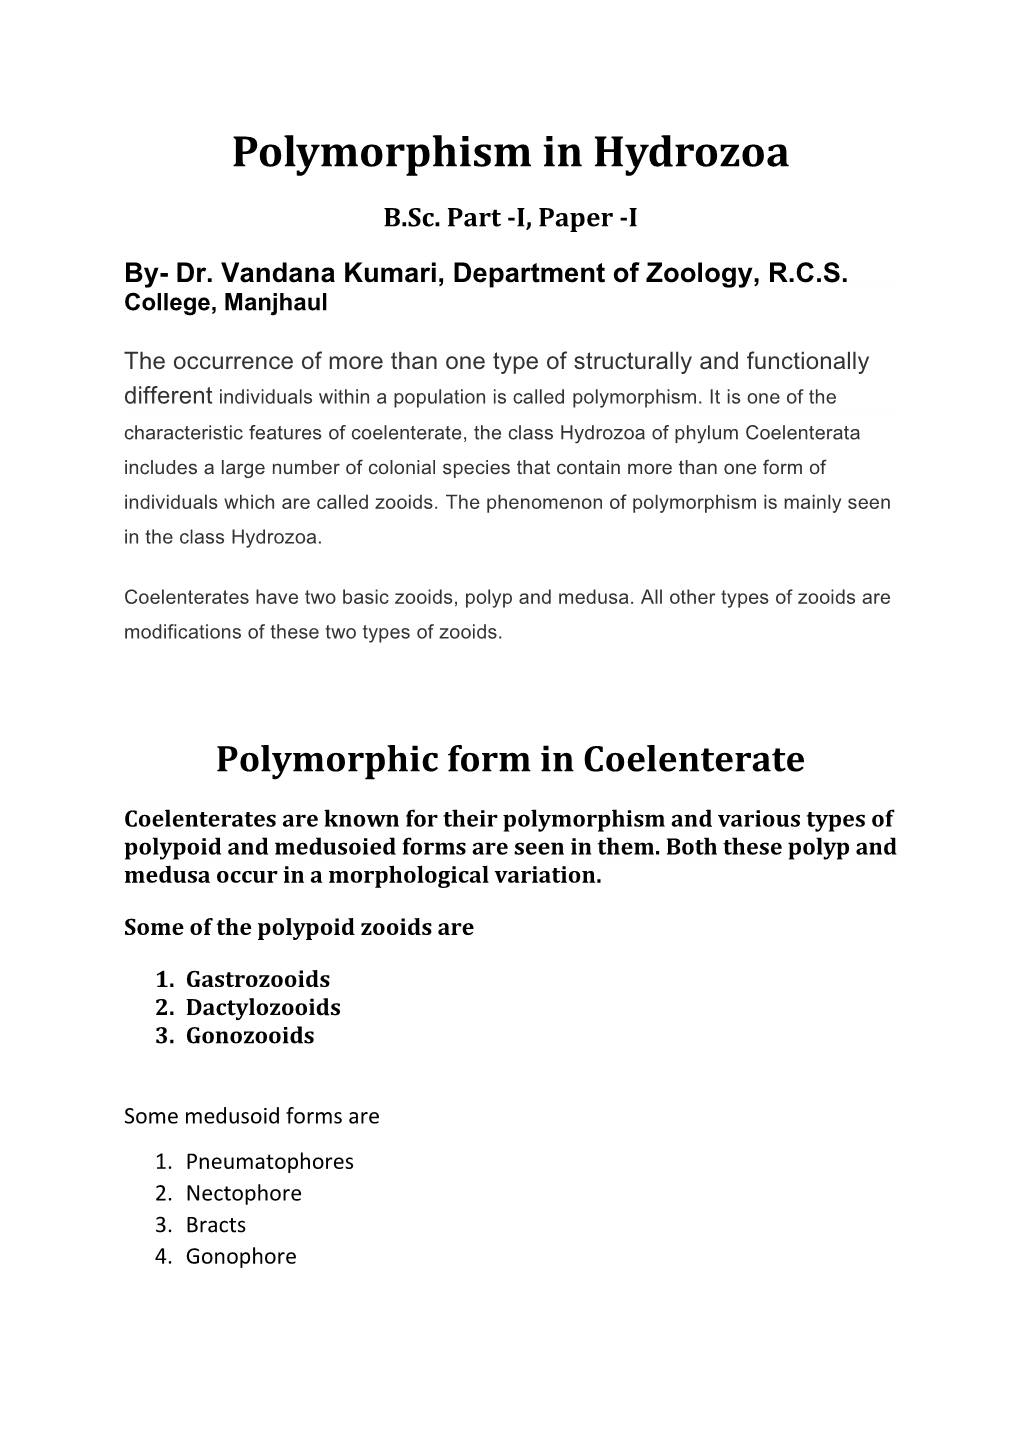 Polymorphism in Hydrozoa